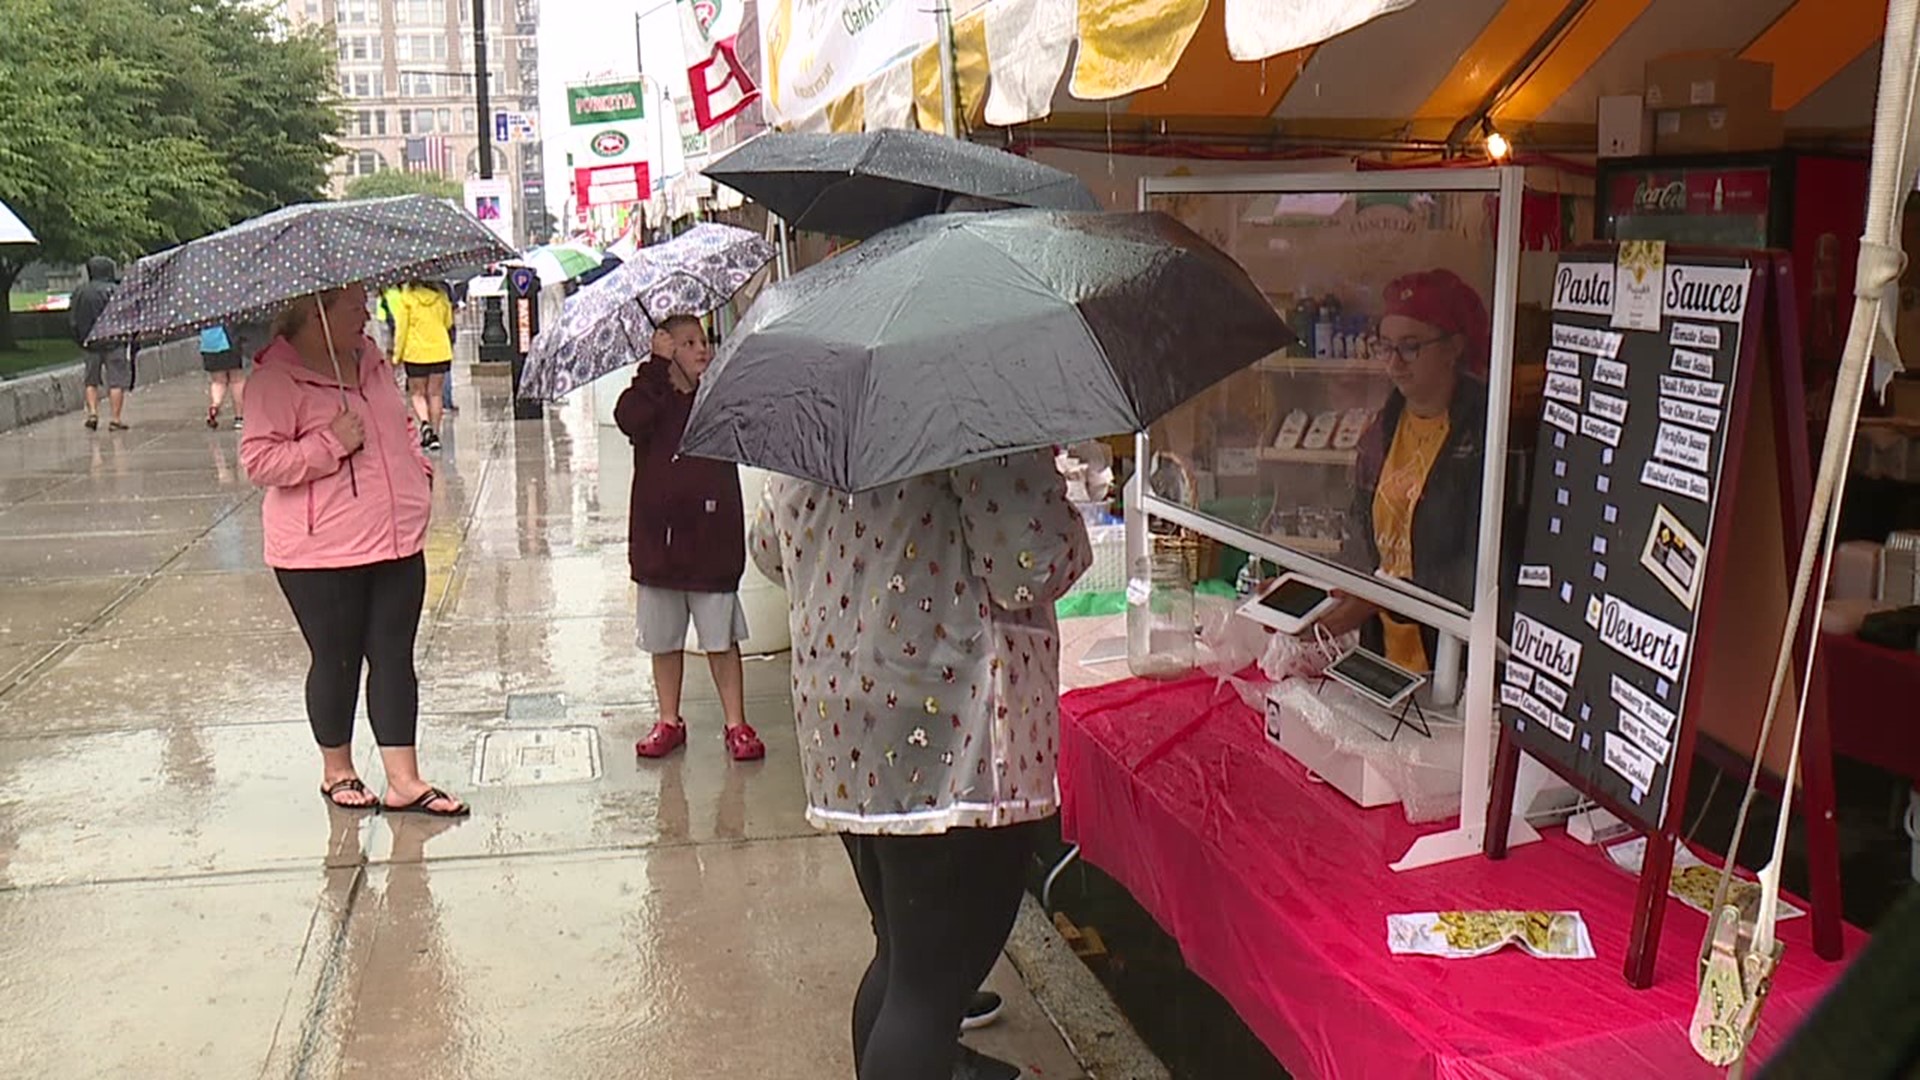 Newswatch 16's Courtney Harrison shows us how the rain may have kept away some vendors, but it didn't scare away some hungry folks.